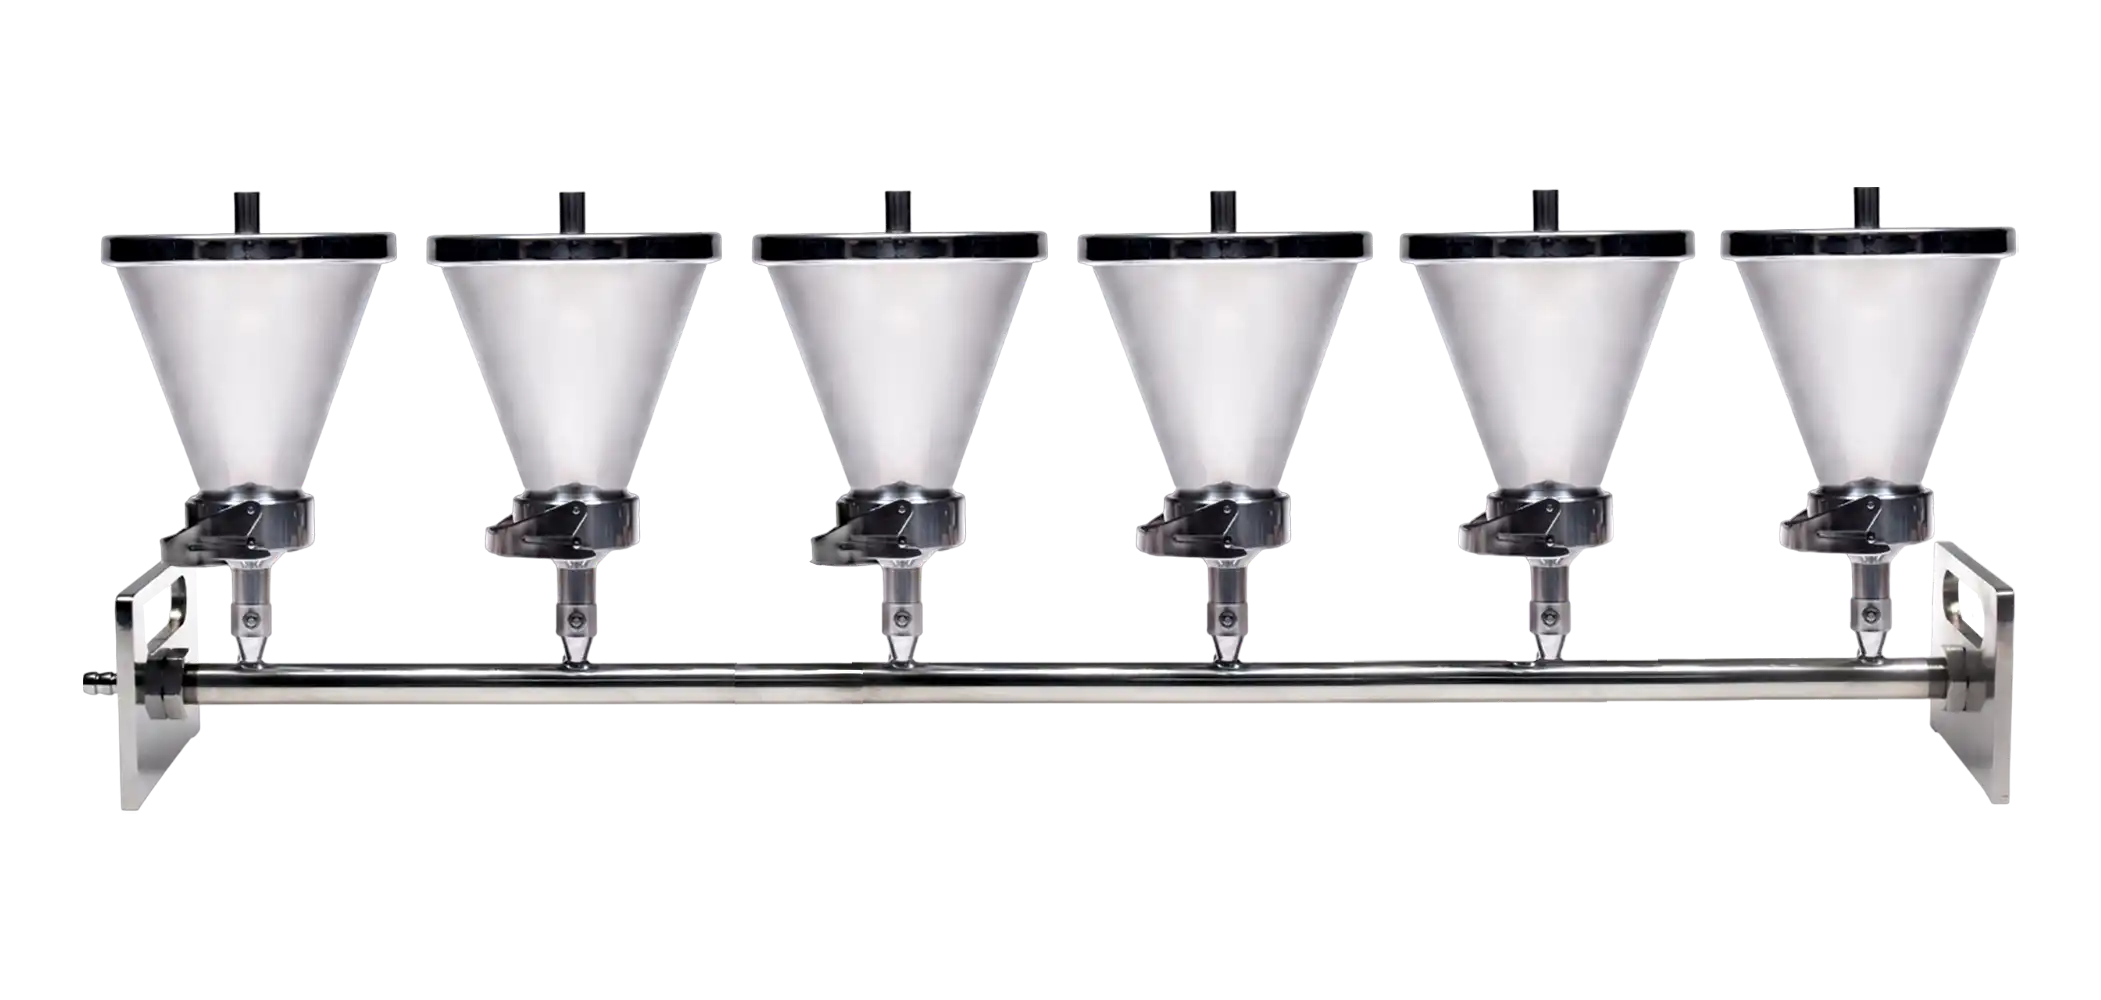 Vacuum Manifold Assembly, Stainless Steel, Conical Filtration Funnel with 6 Stations, 870 x 140 x 250 mm Dimensions, 500 ml Volume